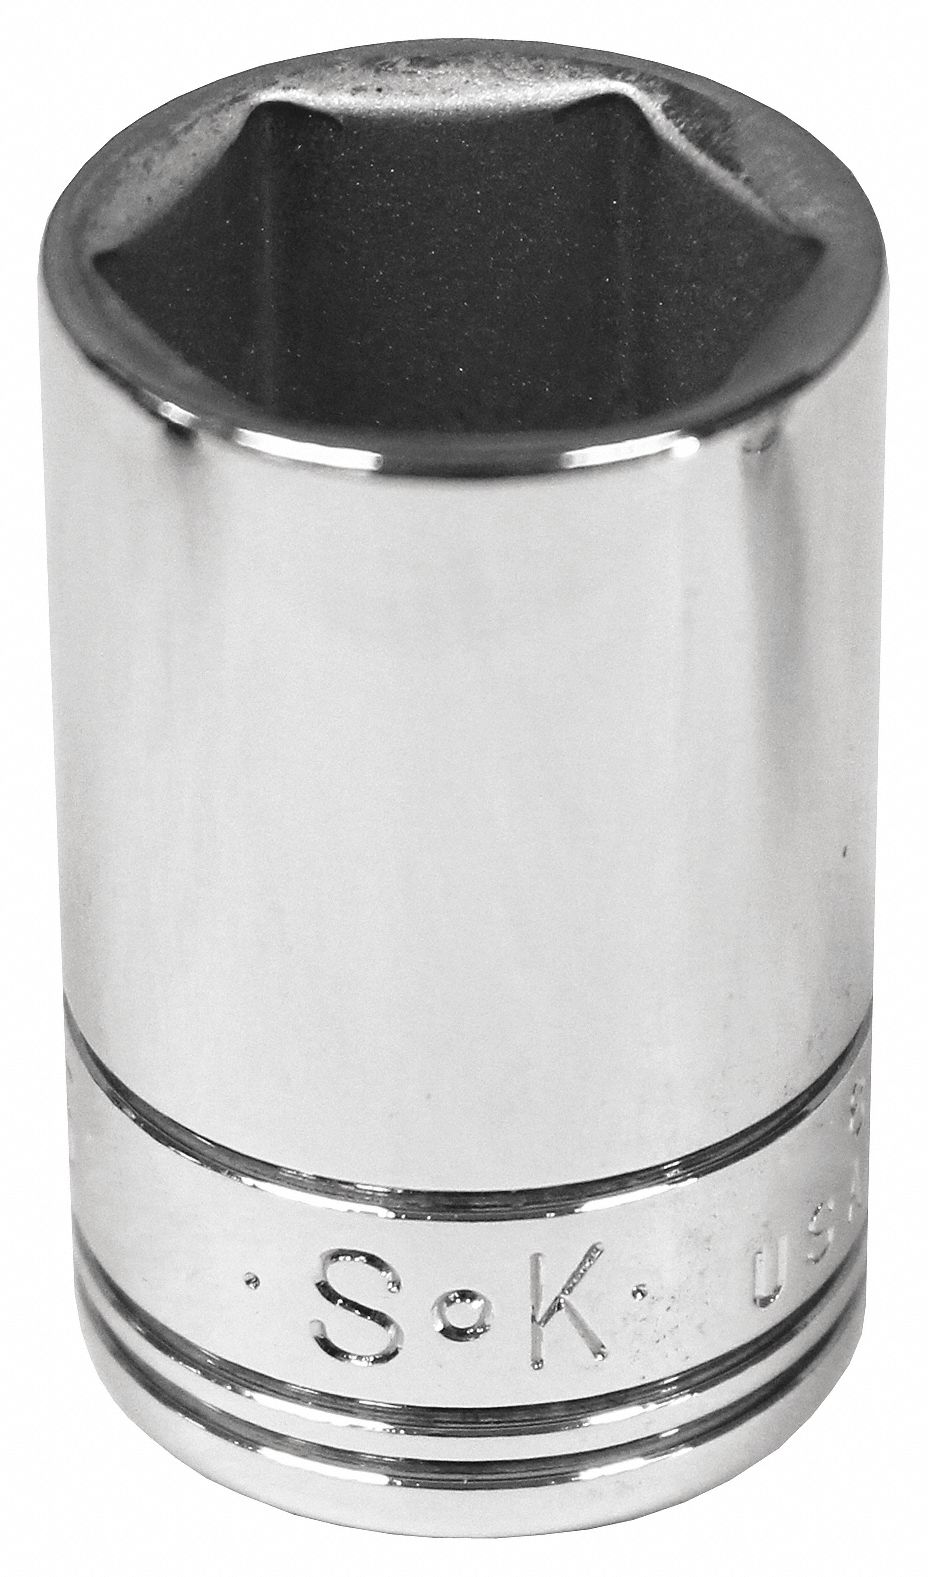 SK Professional Tools 15mm Alloy Steel Socket With 1/4" Drive Size and Chrome for sale online